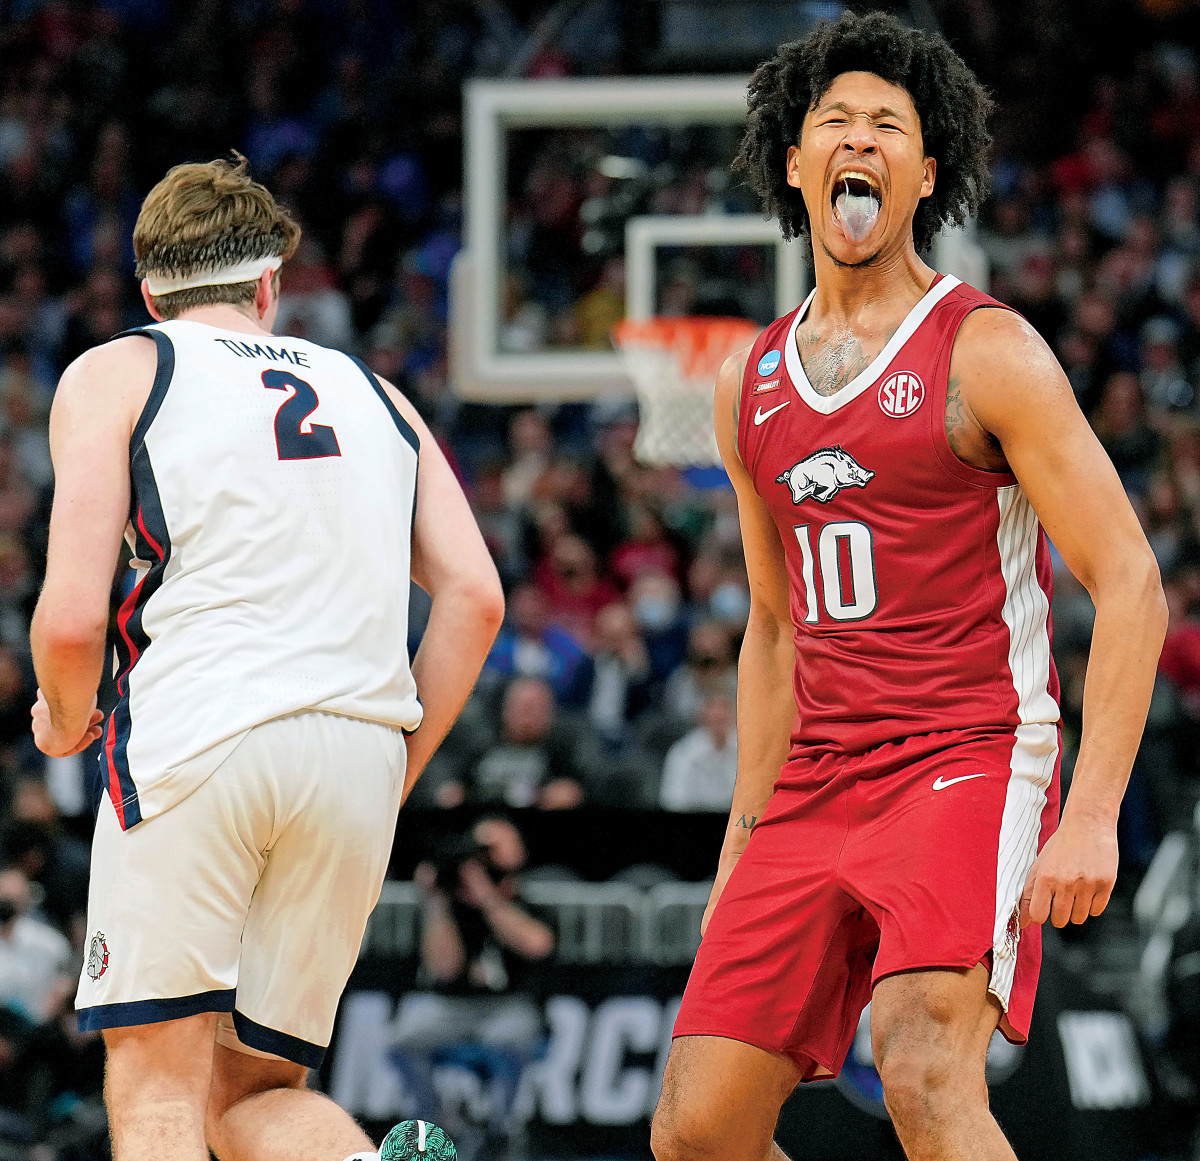 Arkansas Razorbacks forward Jaylin Williams (10) reacts after a play against the Gonzaga Bulldogs during the second half in the semifinals of the West regional in San Francisco. Williams struggled early against Timme, but learned and adapted as the game progressed, leading to Timme's frustration late.